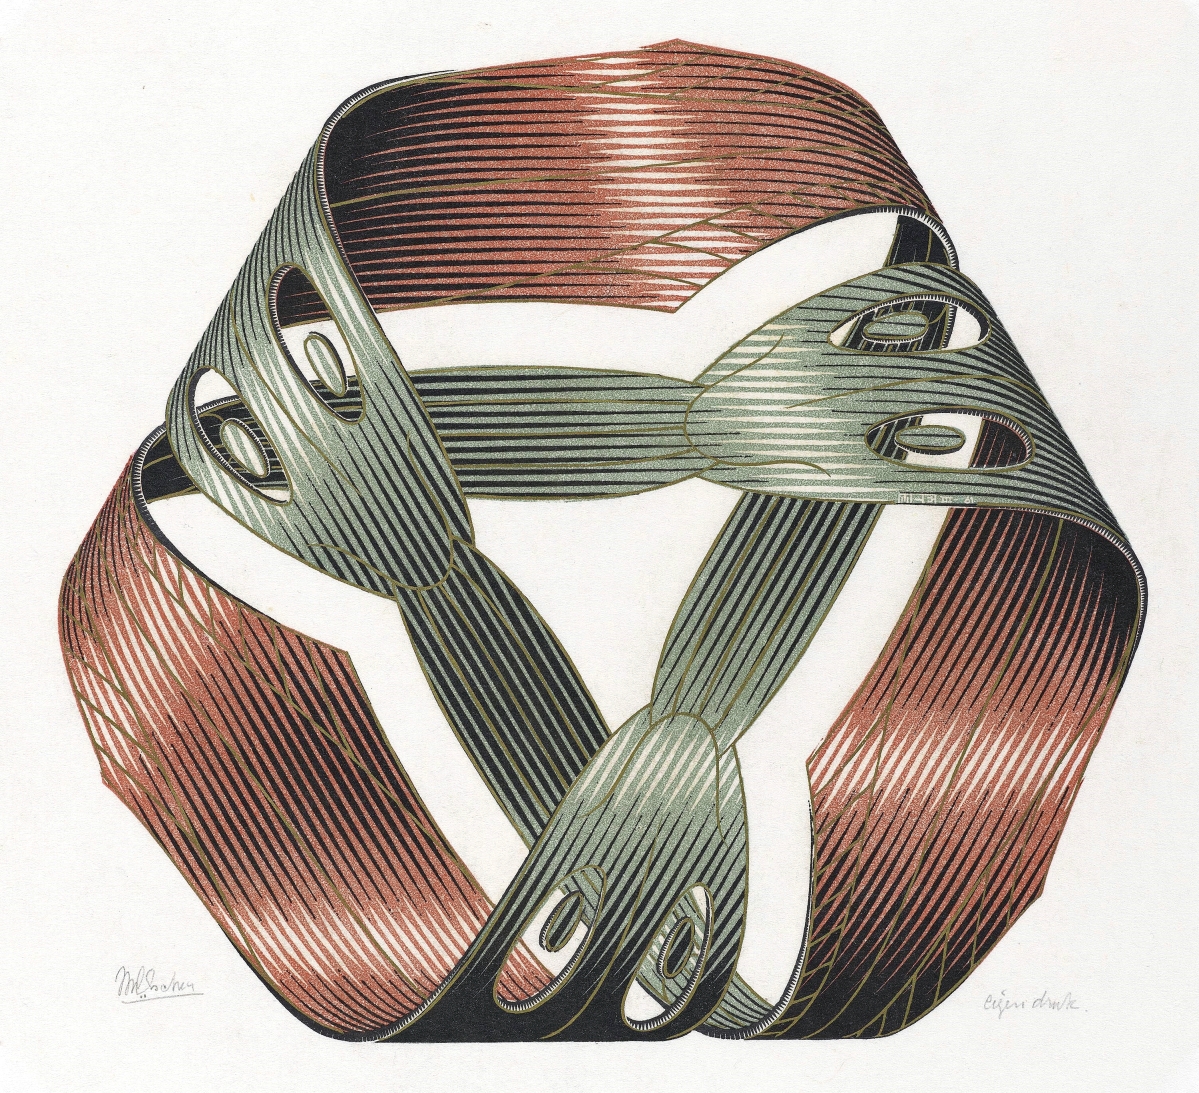 “Möbius Strip I” MC Escher, March 1961. Wood engraving and woodcut in red, green, gold, and black, printed from two blocks, on paper.  Courtesy of Michael S. Sachs.  All MC Escher works ©The MC Escher Company, The Netherlands.  All rights reserved.